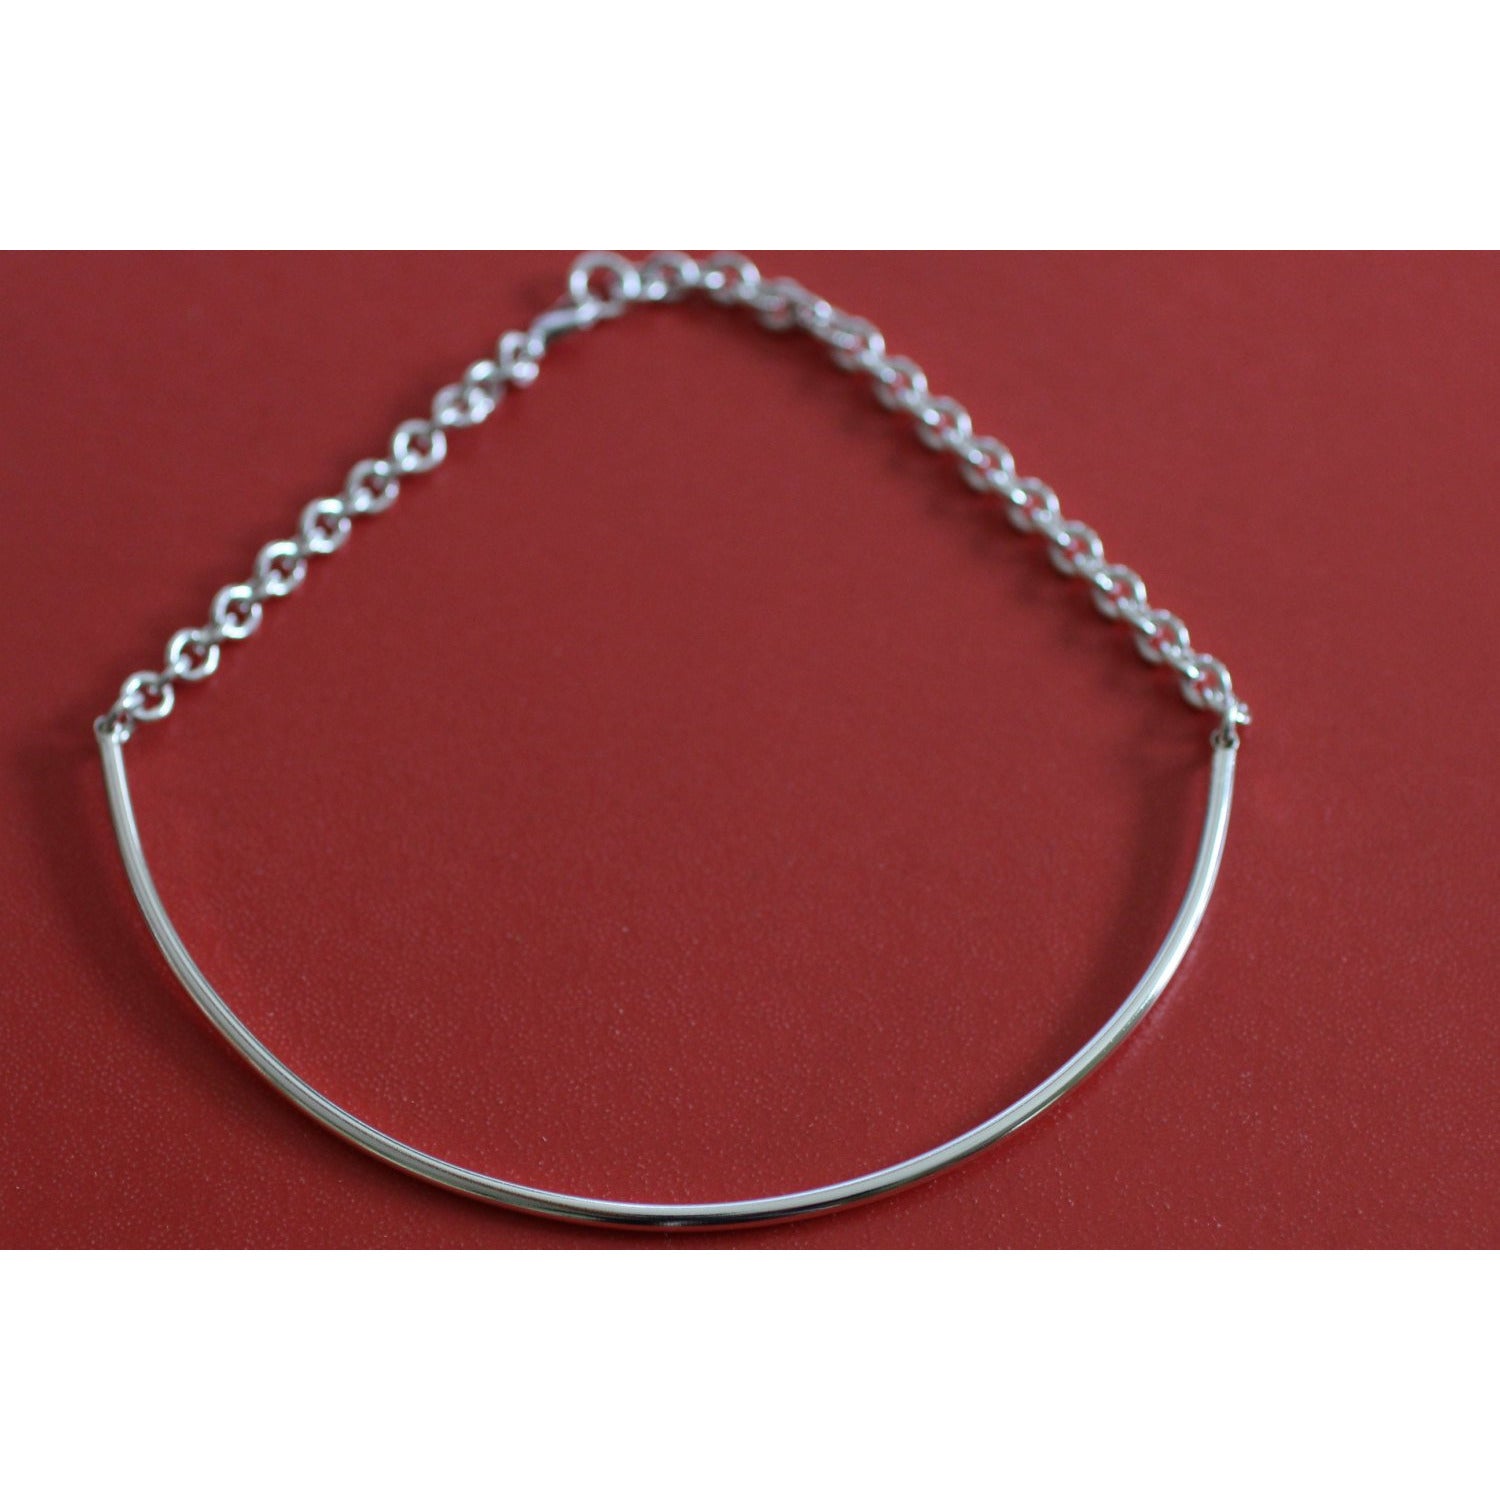 New Design, Discreet Day Collar, 3mm Sterling Silver (8g), Chain Back Section, Handmade, BDSM Collar